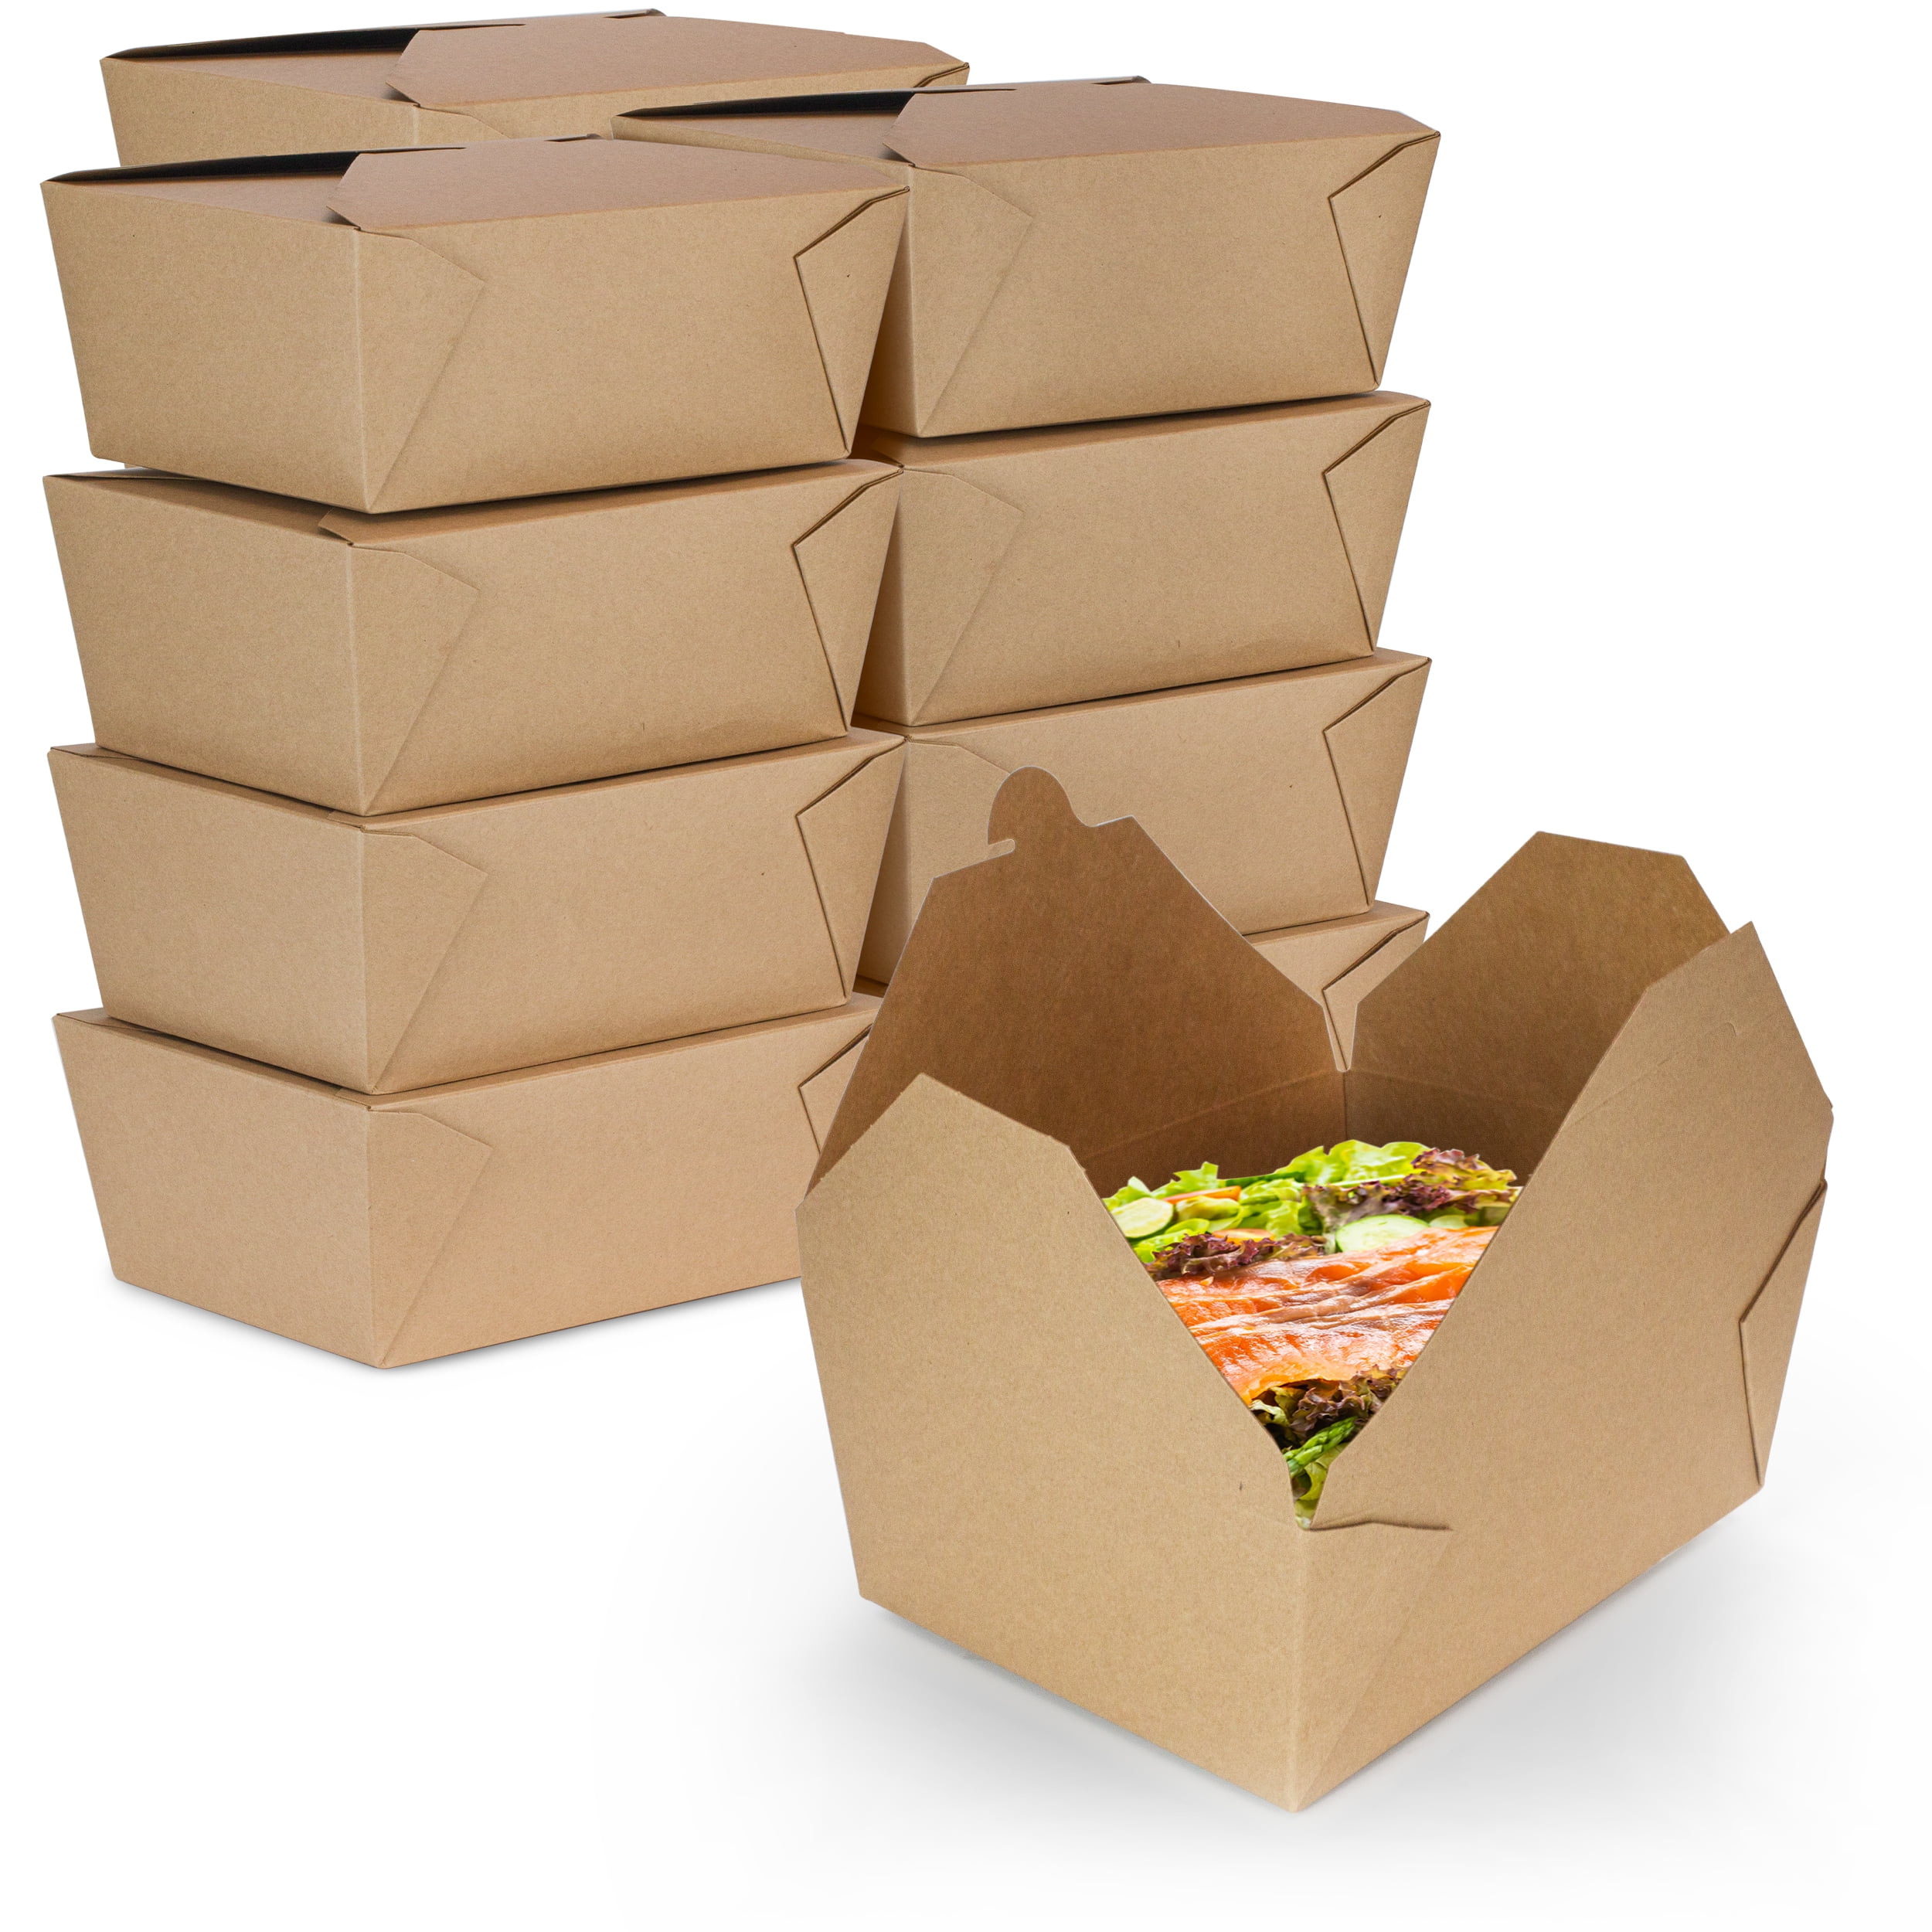 Takeout Container (Wax or Plastic-Lined Paperboard) - Napa